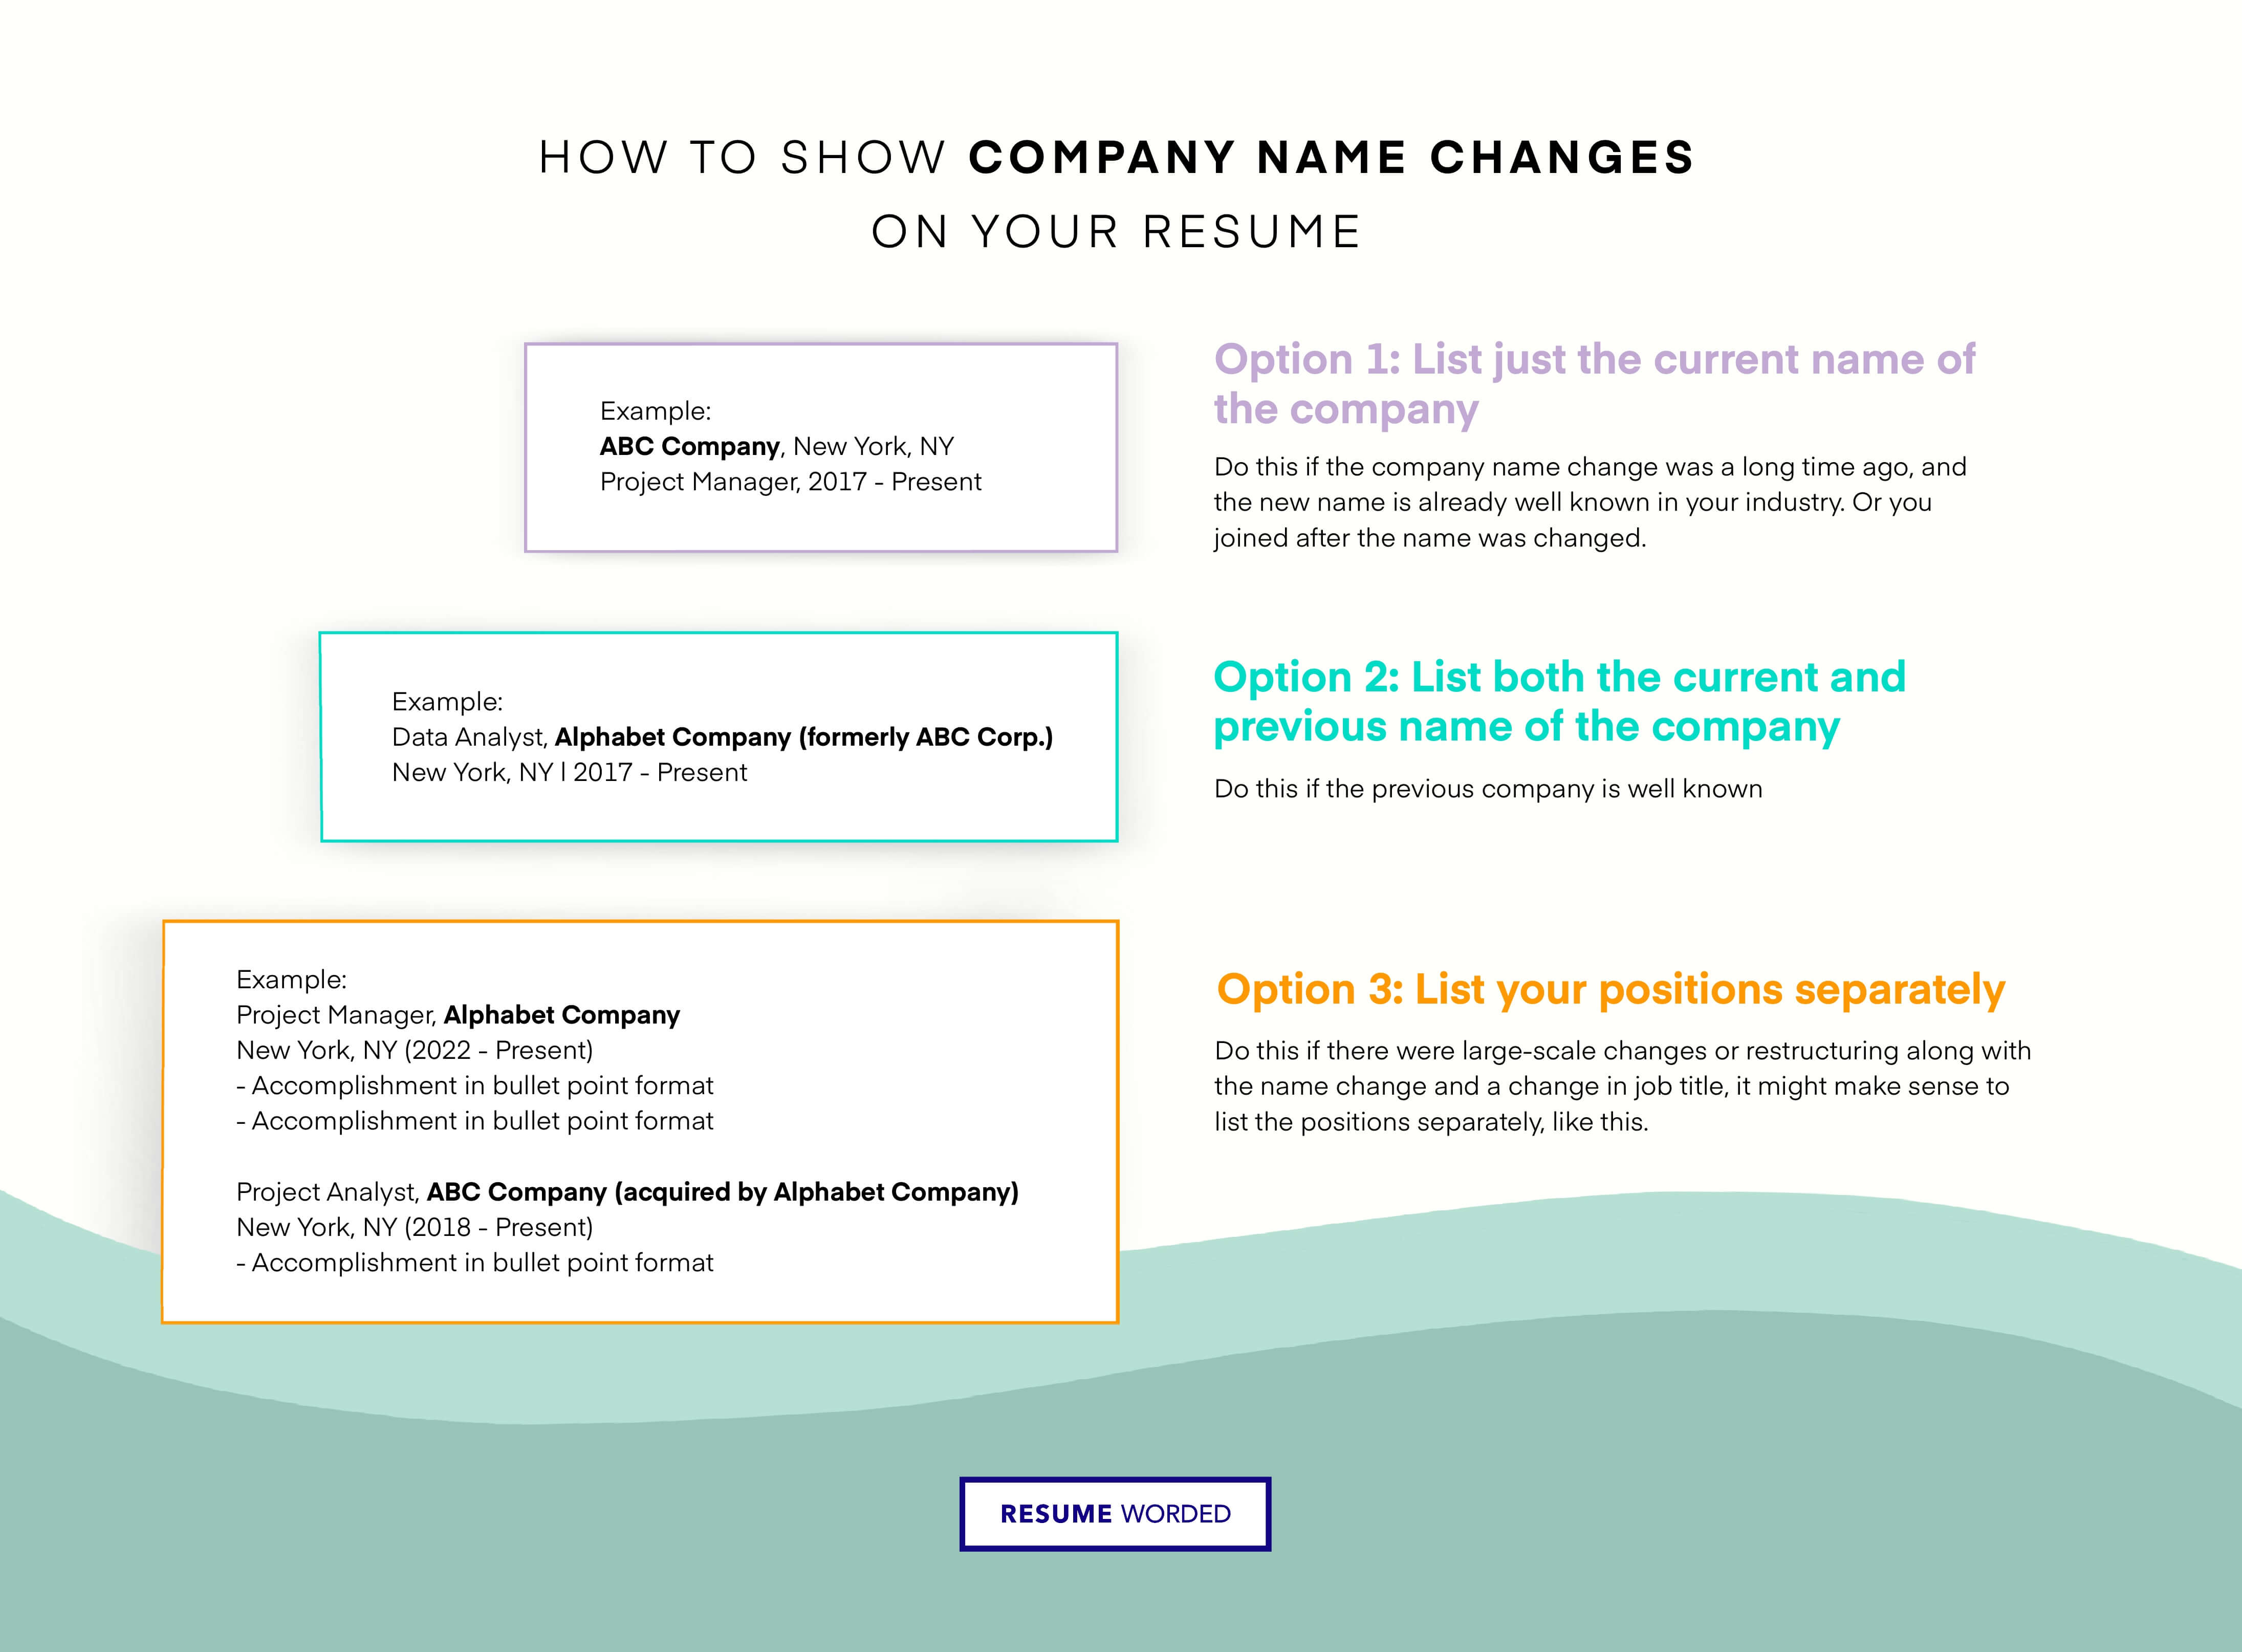 how-to-deal-with-a-company-name-change-on-your-resume